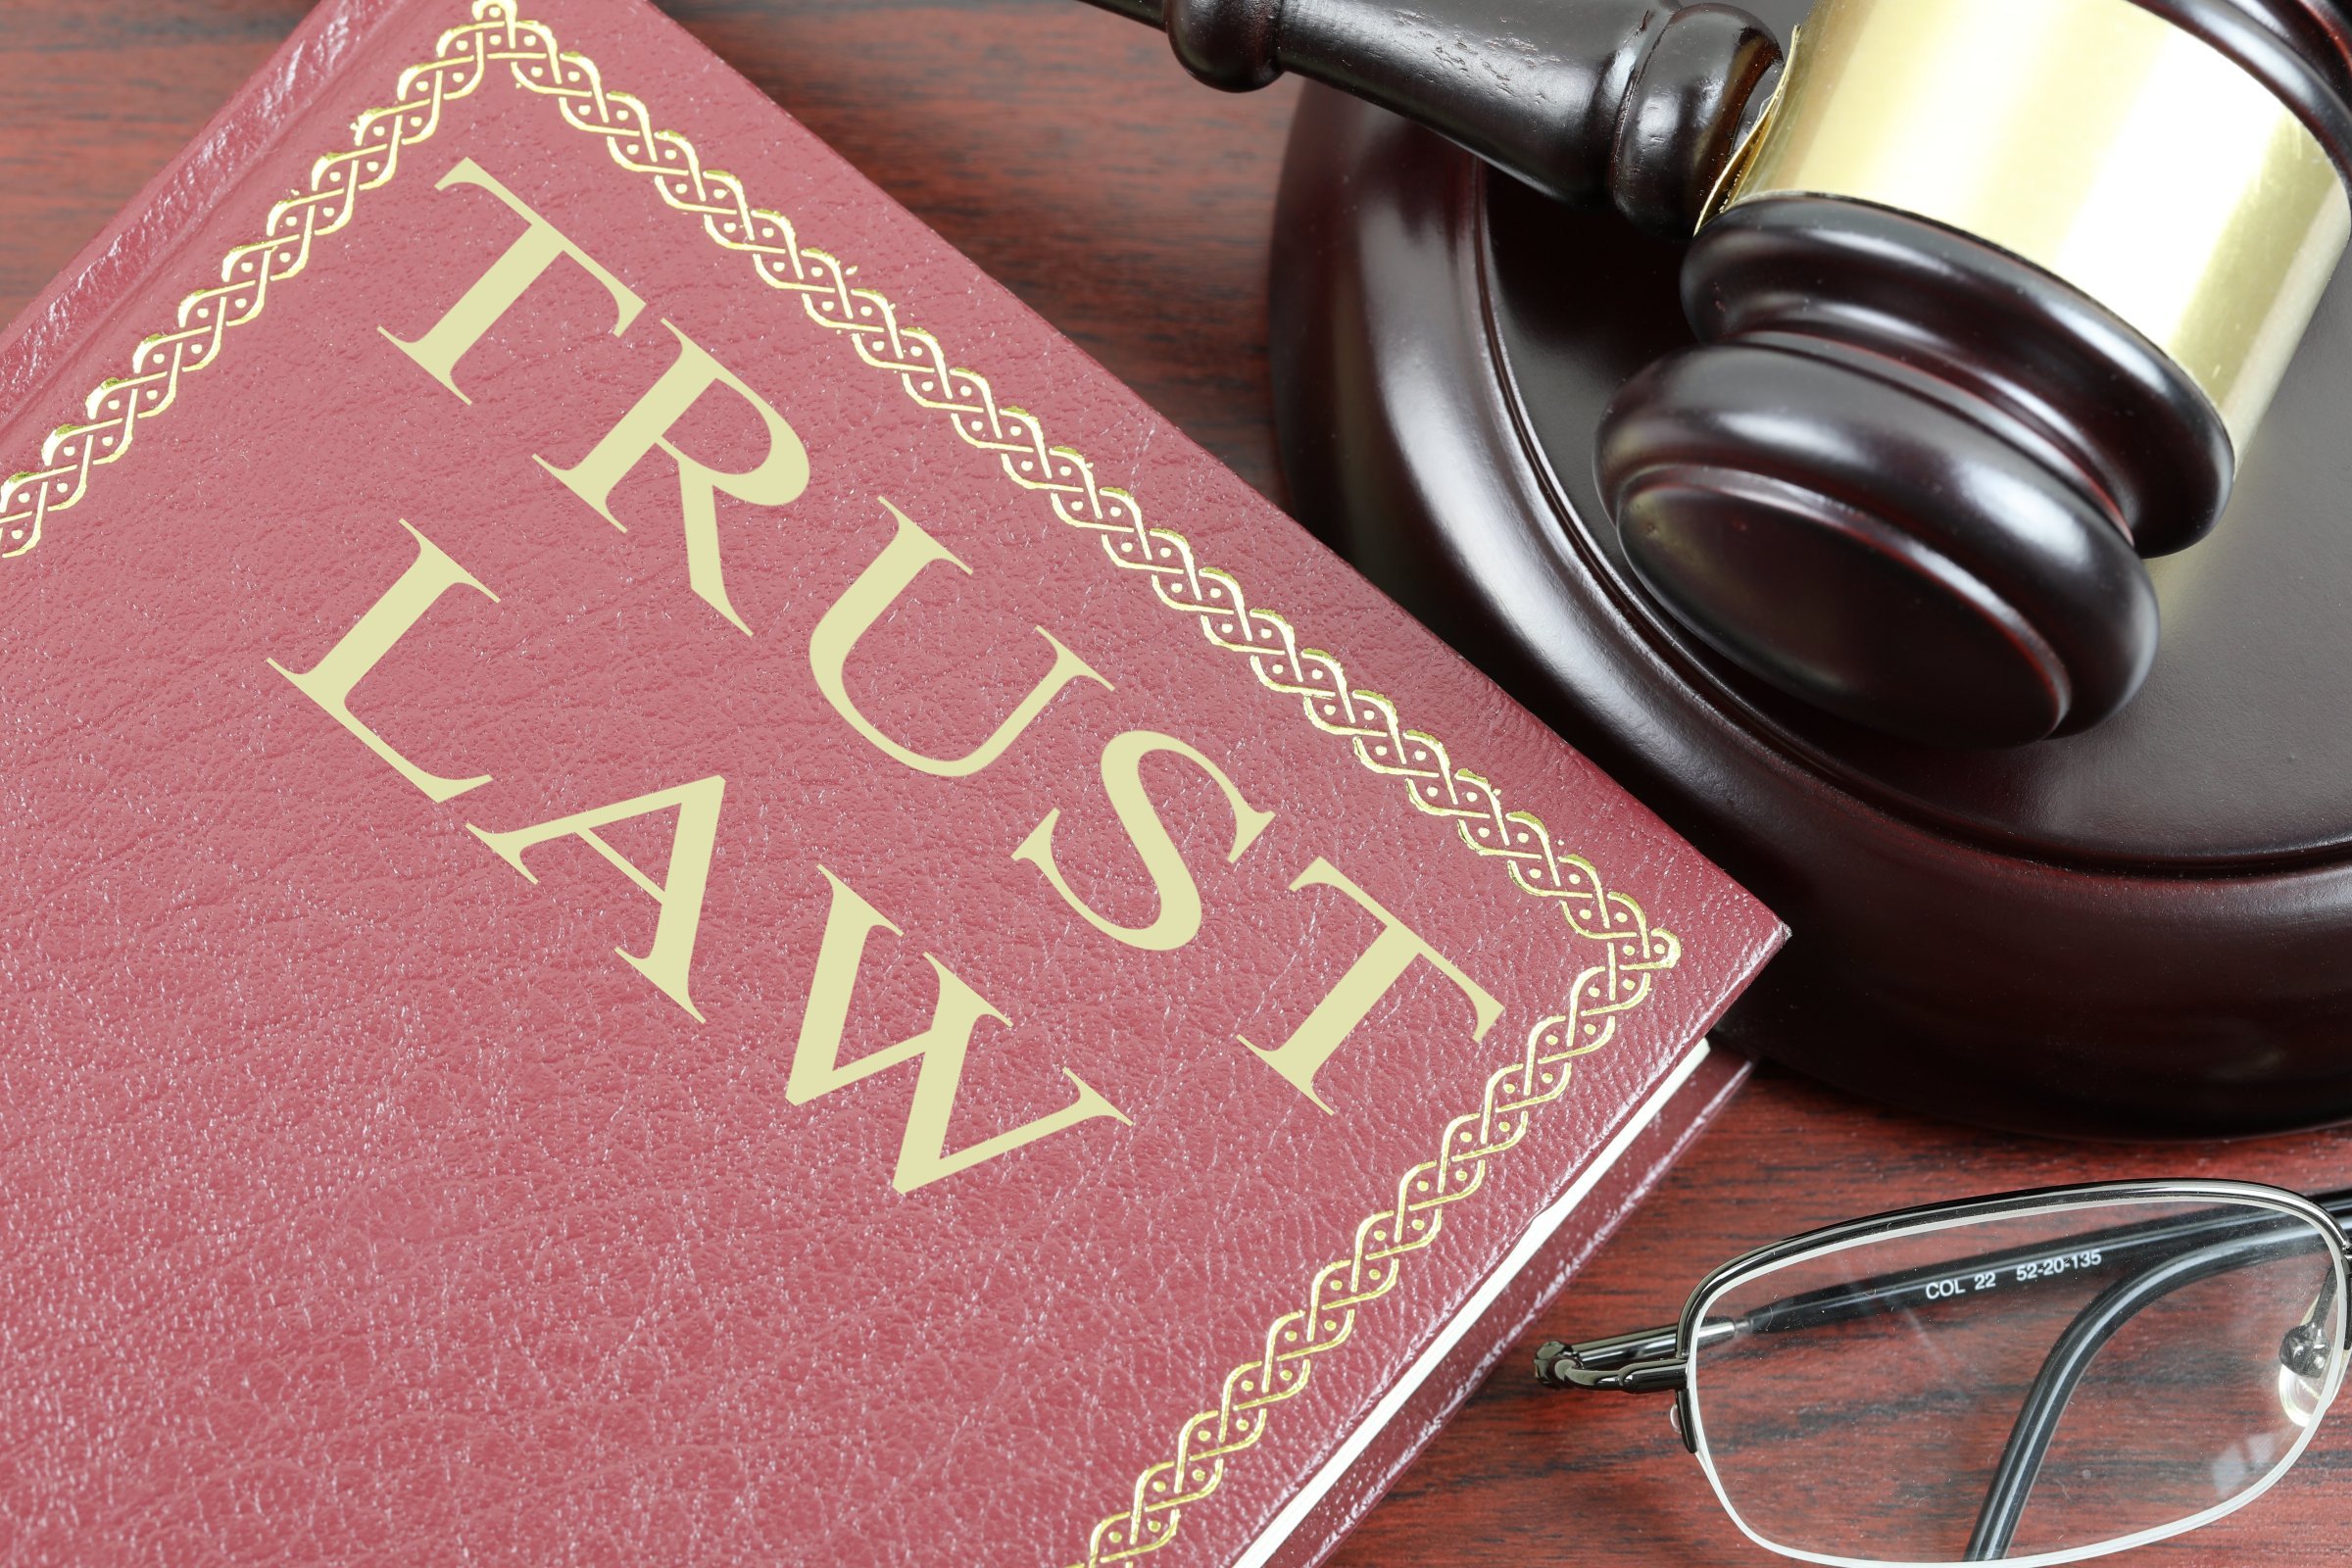 Trust Law Free of Charge Creative Commons Law book image